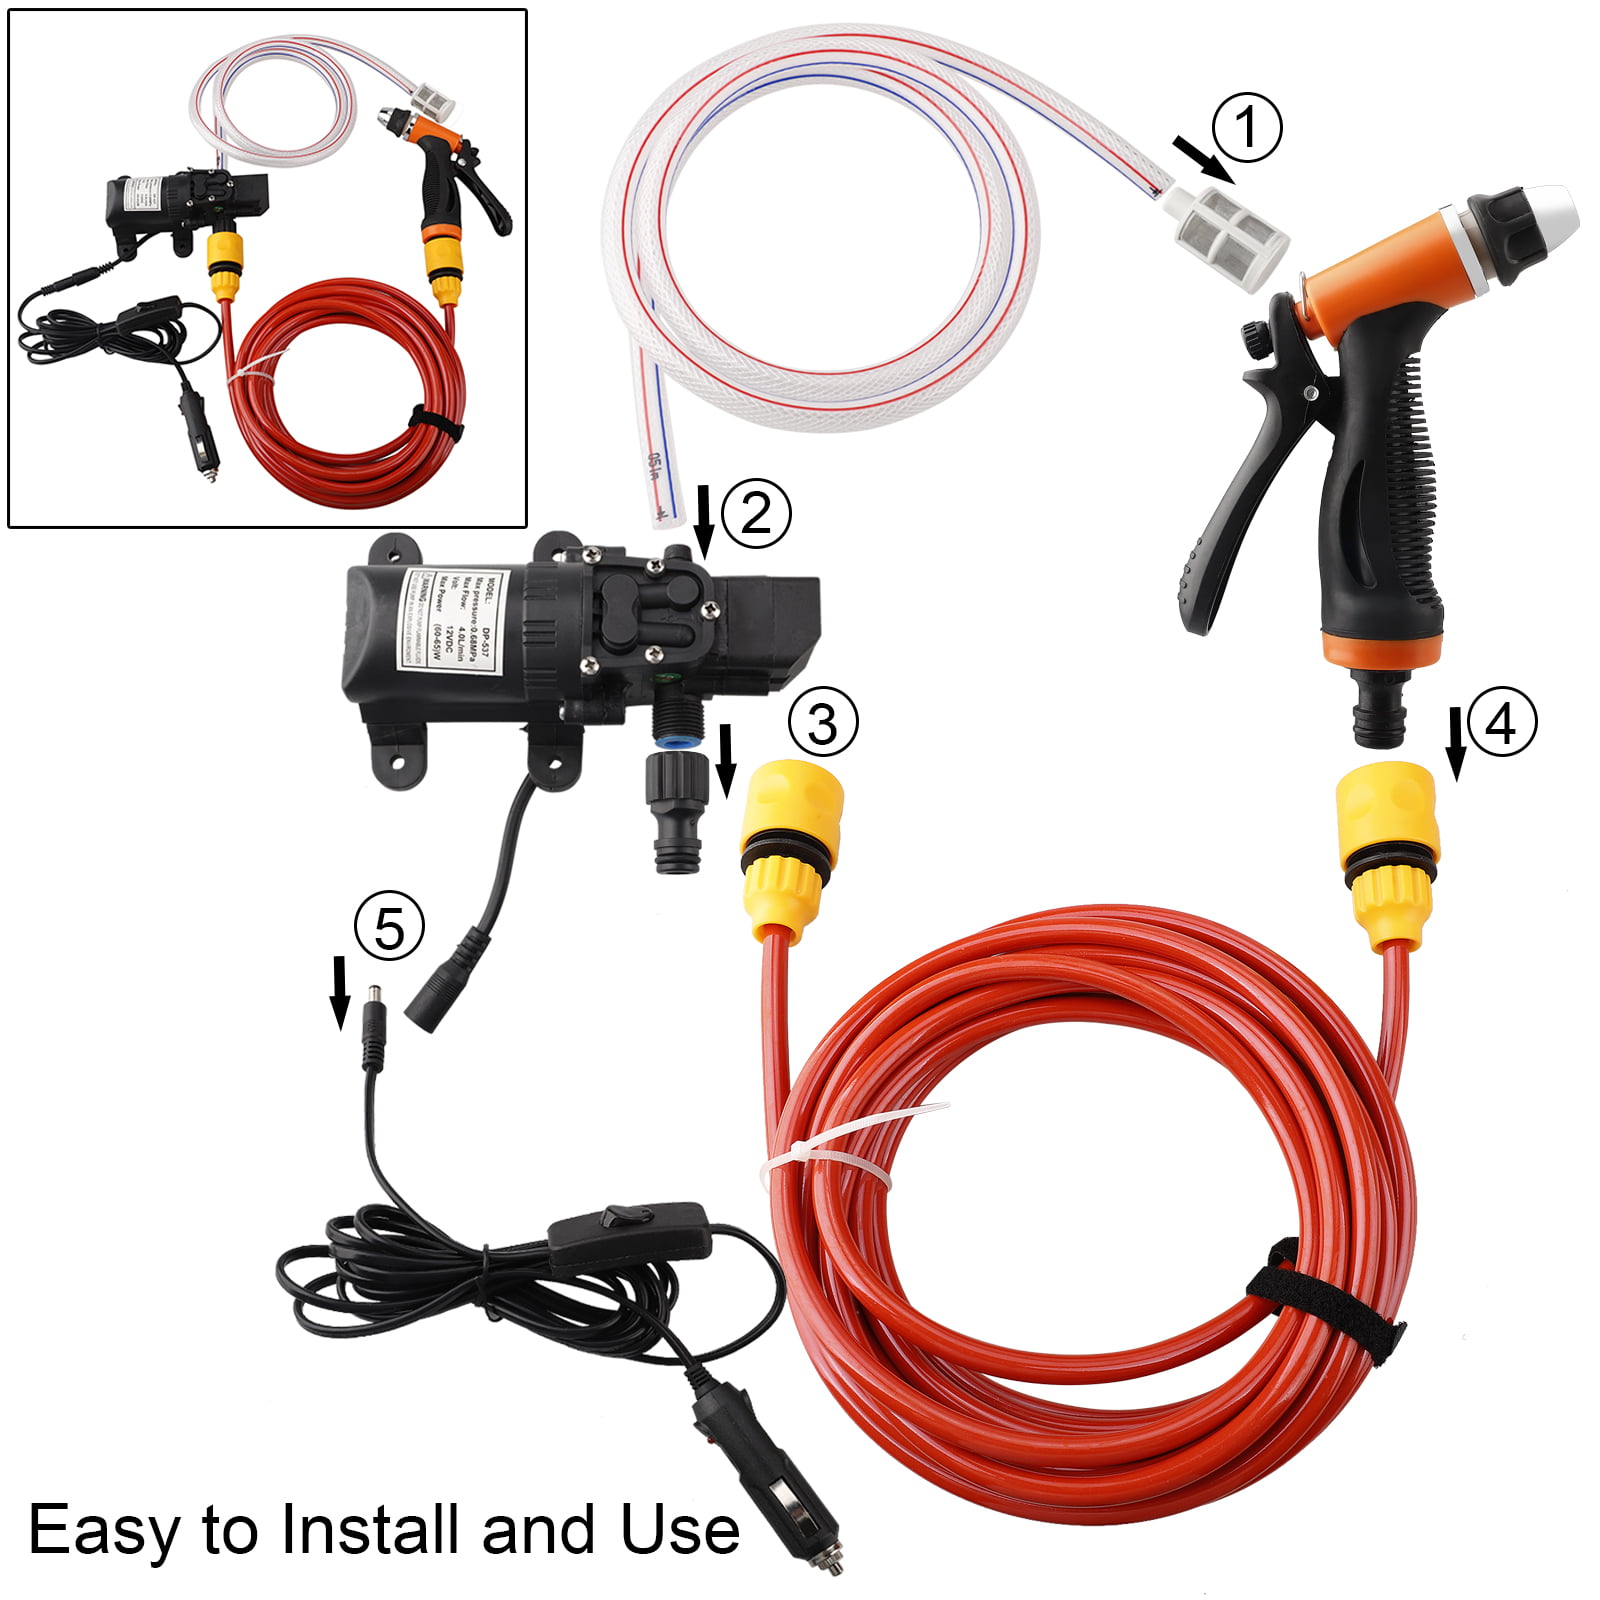 80W 12V Car Washer Kit Self-priming High Pressure Portable Wash Washer Set for Auto Motor Marine Pet Window Travel Gardening Camping Cleaning 